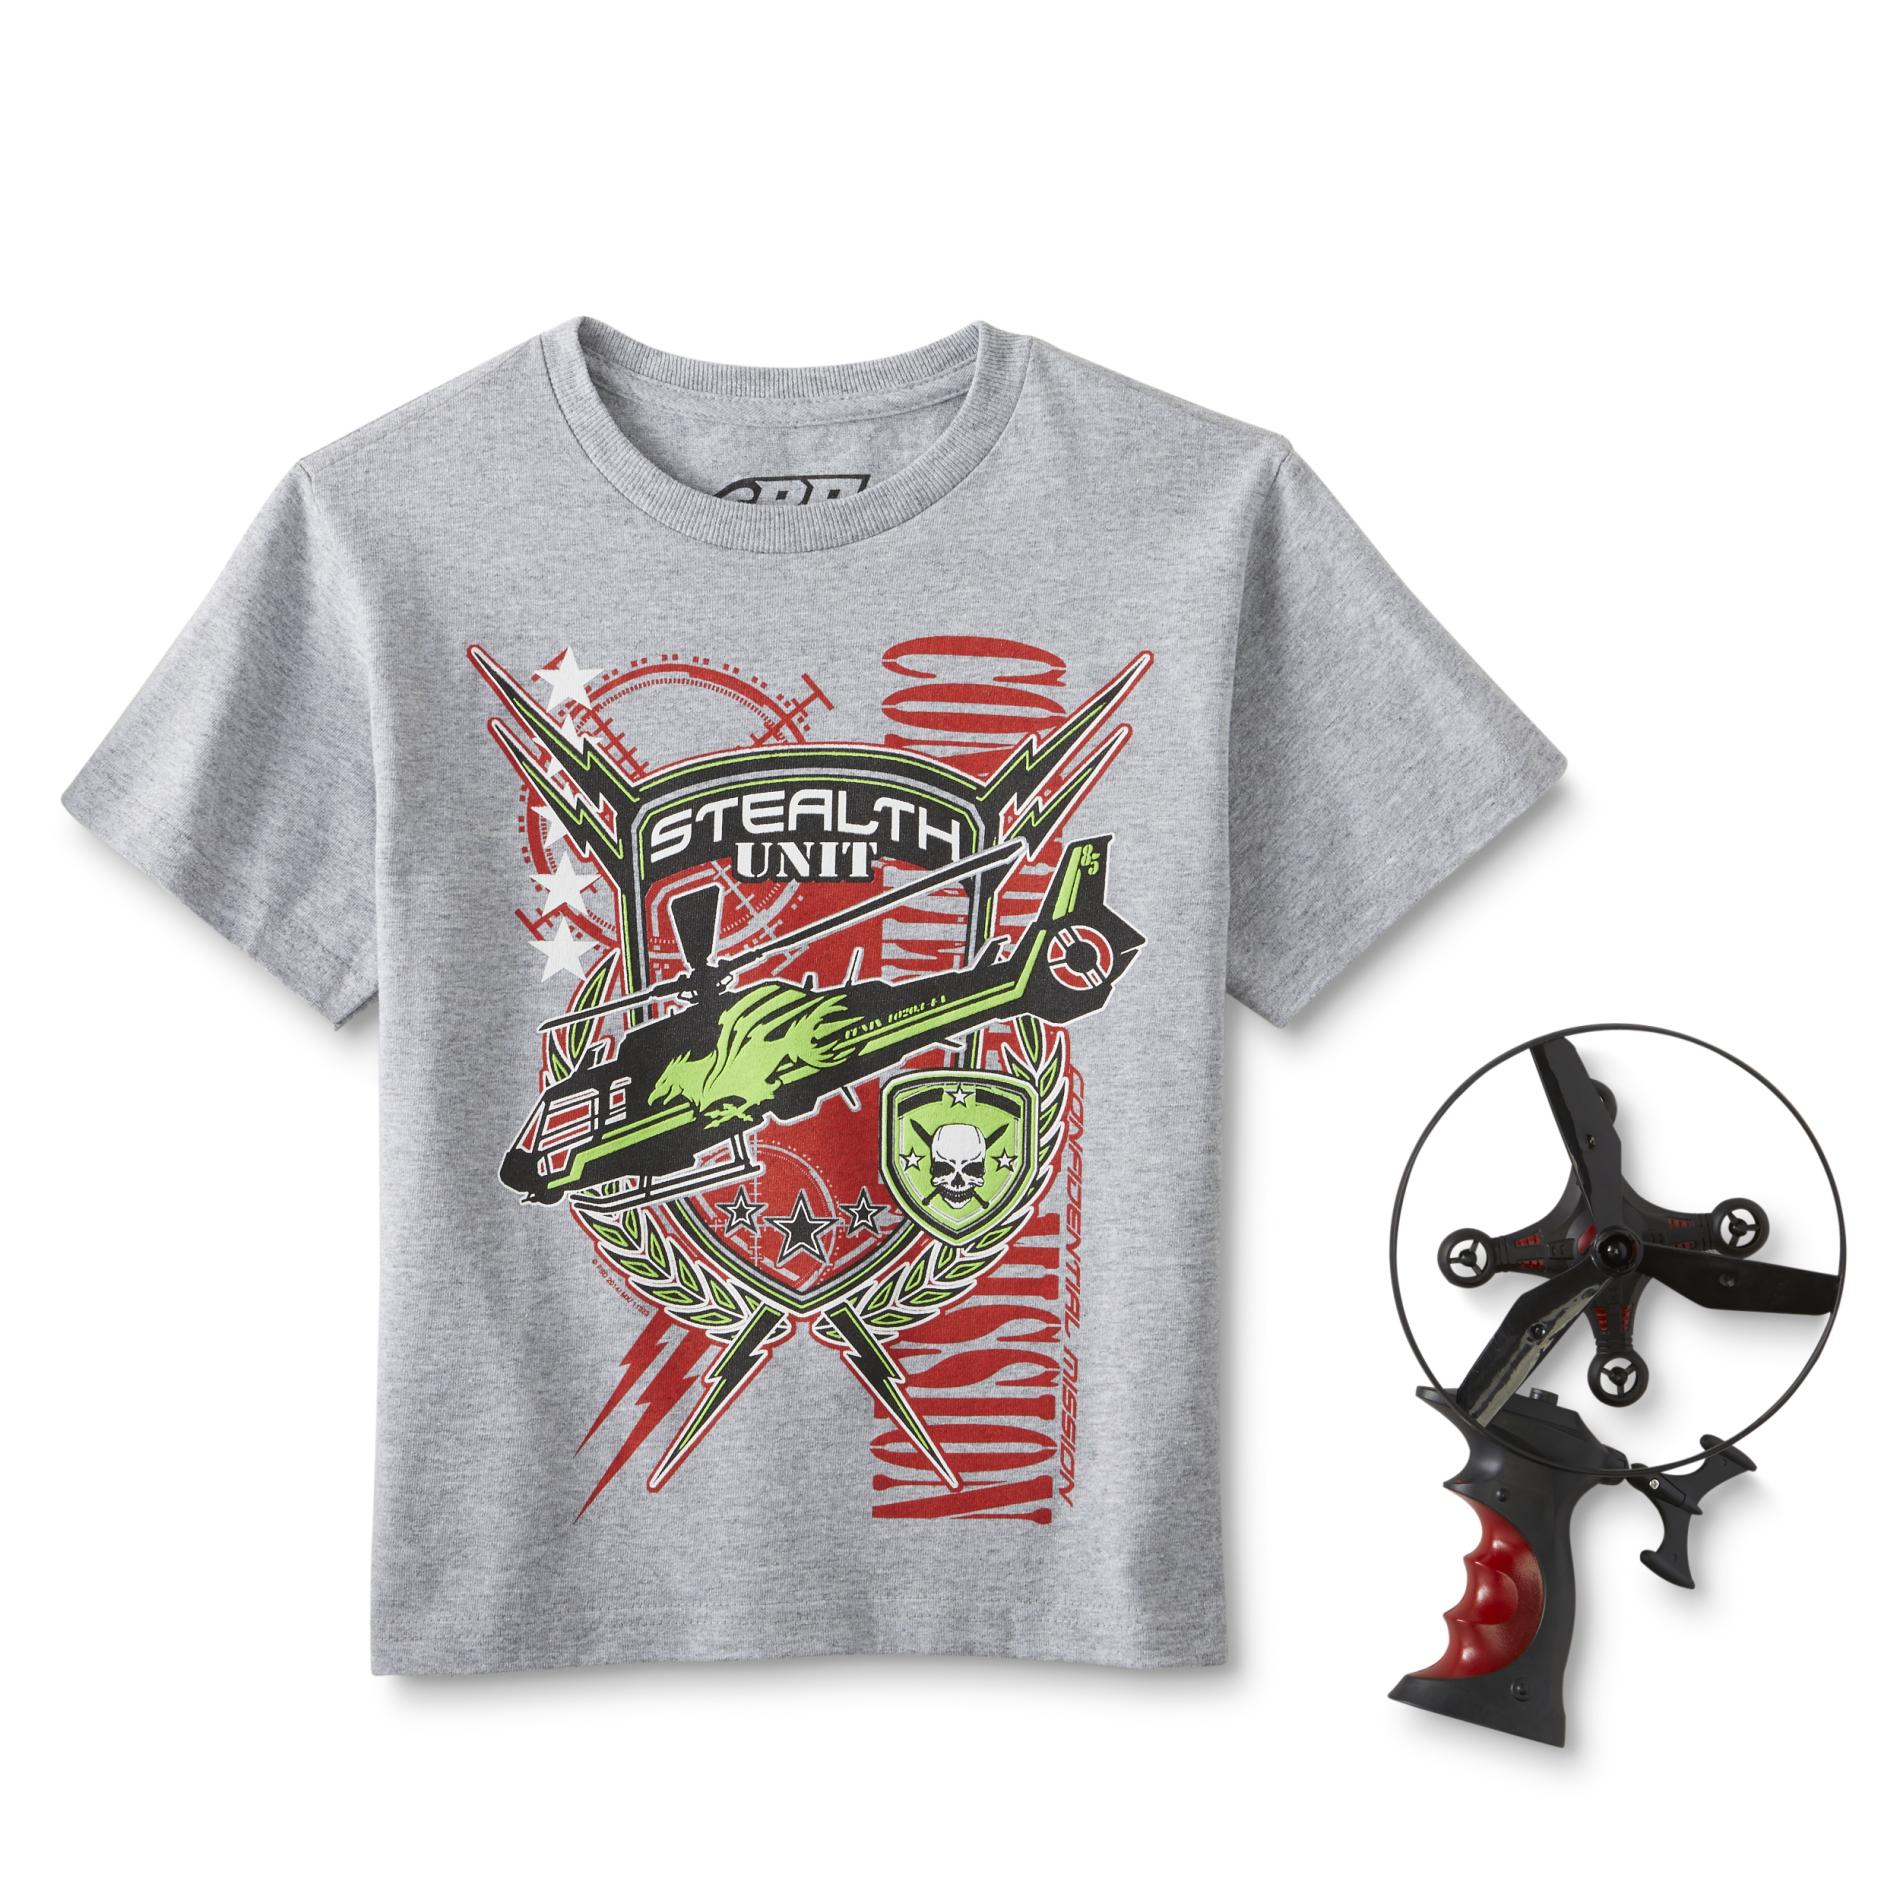 Boy's Graphic T-Shirt & Drone Helicopter Toy